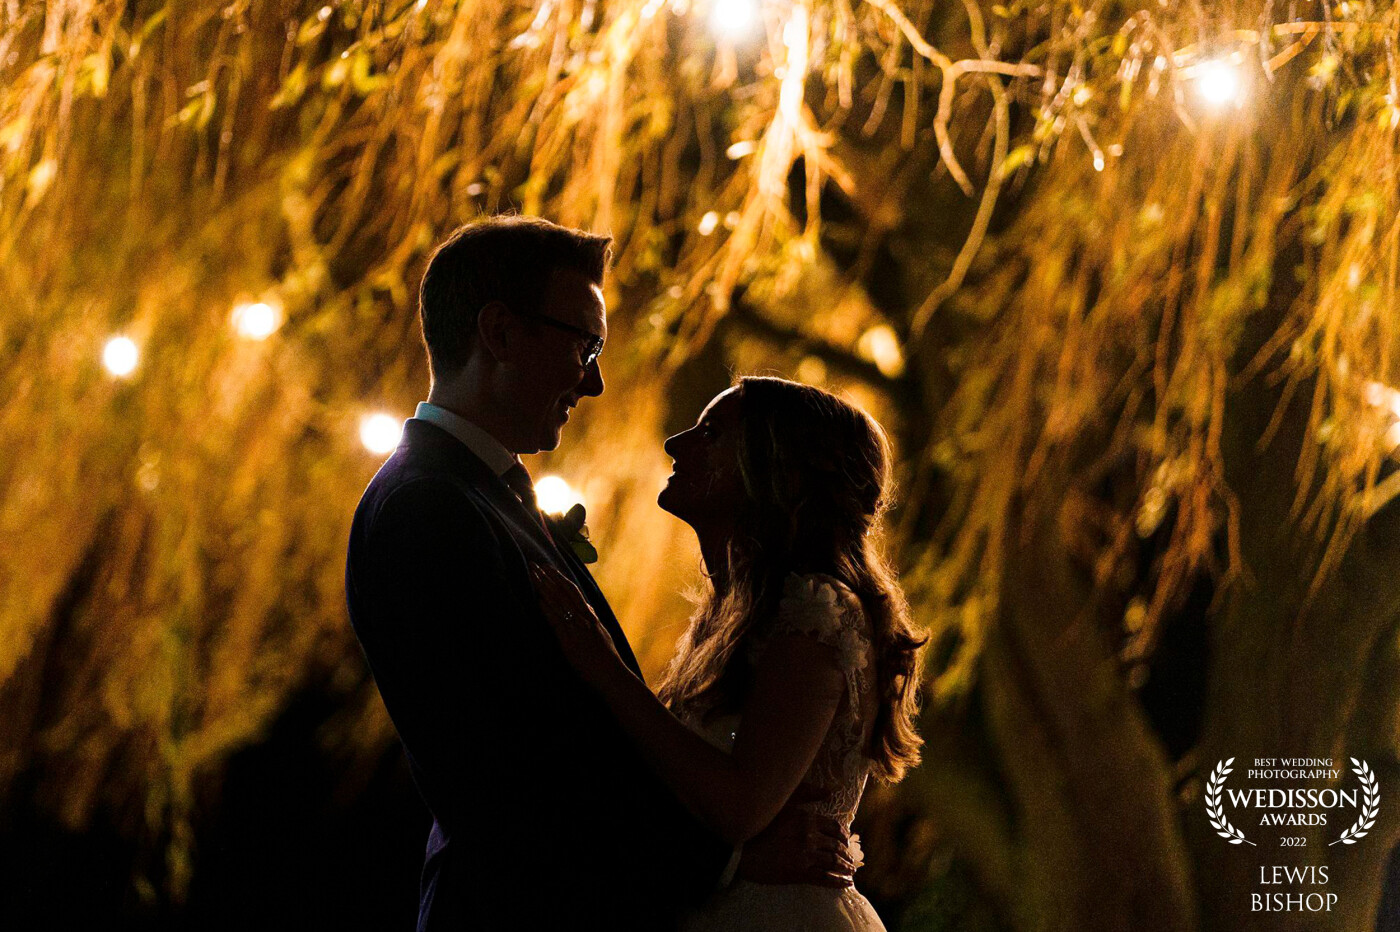 I love to take advantage of available light, and this venue had the most beautiful tree which lit up during the evening! I love the way the bride and groom are silhouetted against the backdrop of the tree.